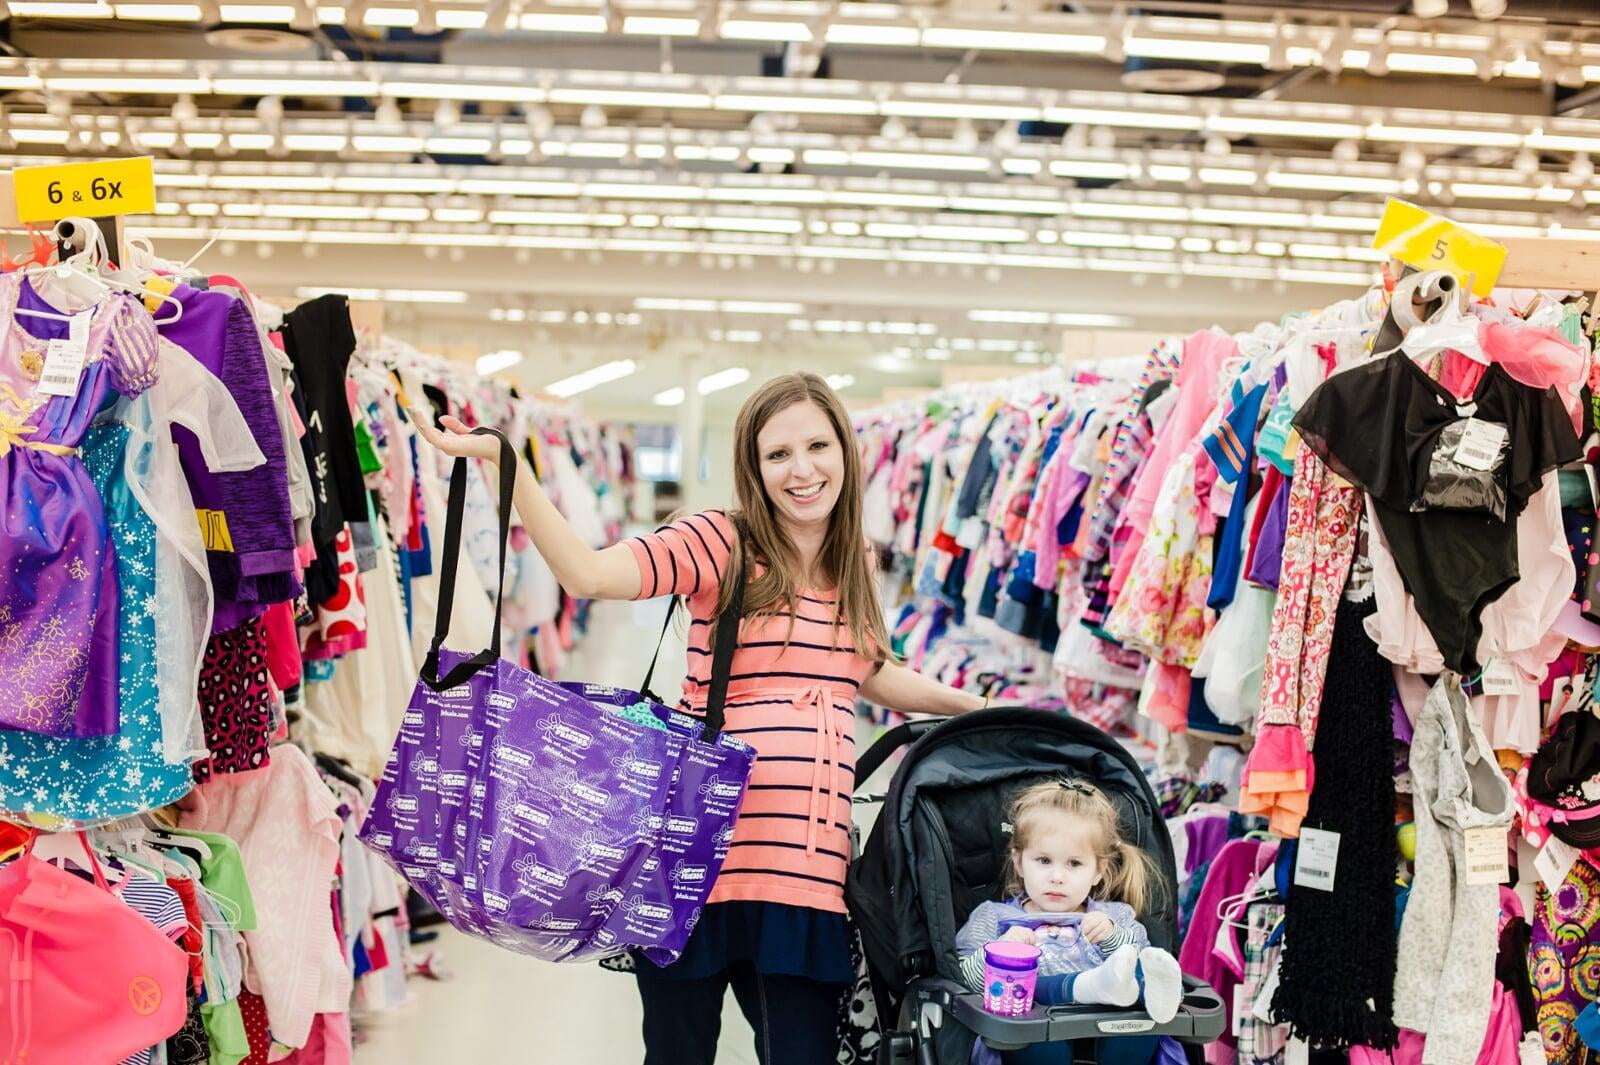 Two masked moms—one holding a child with a mask, the other pregnant—shop for their families at the local JBF sale.